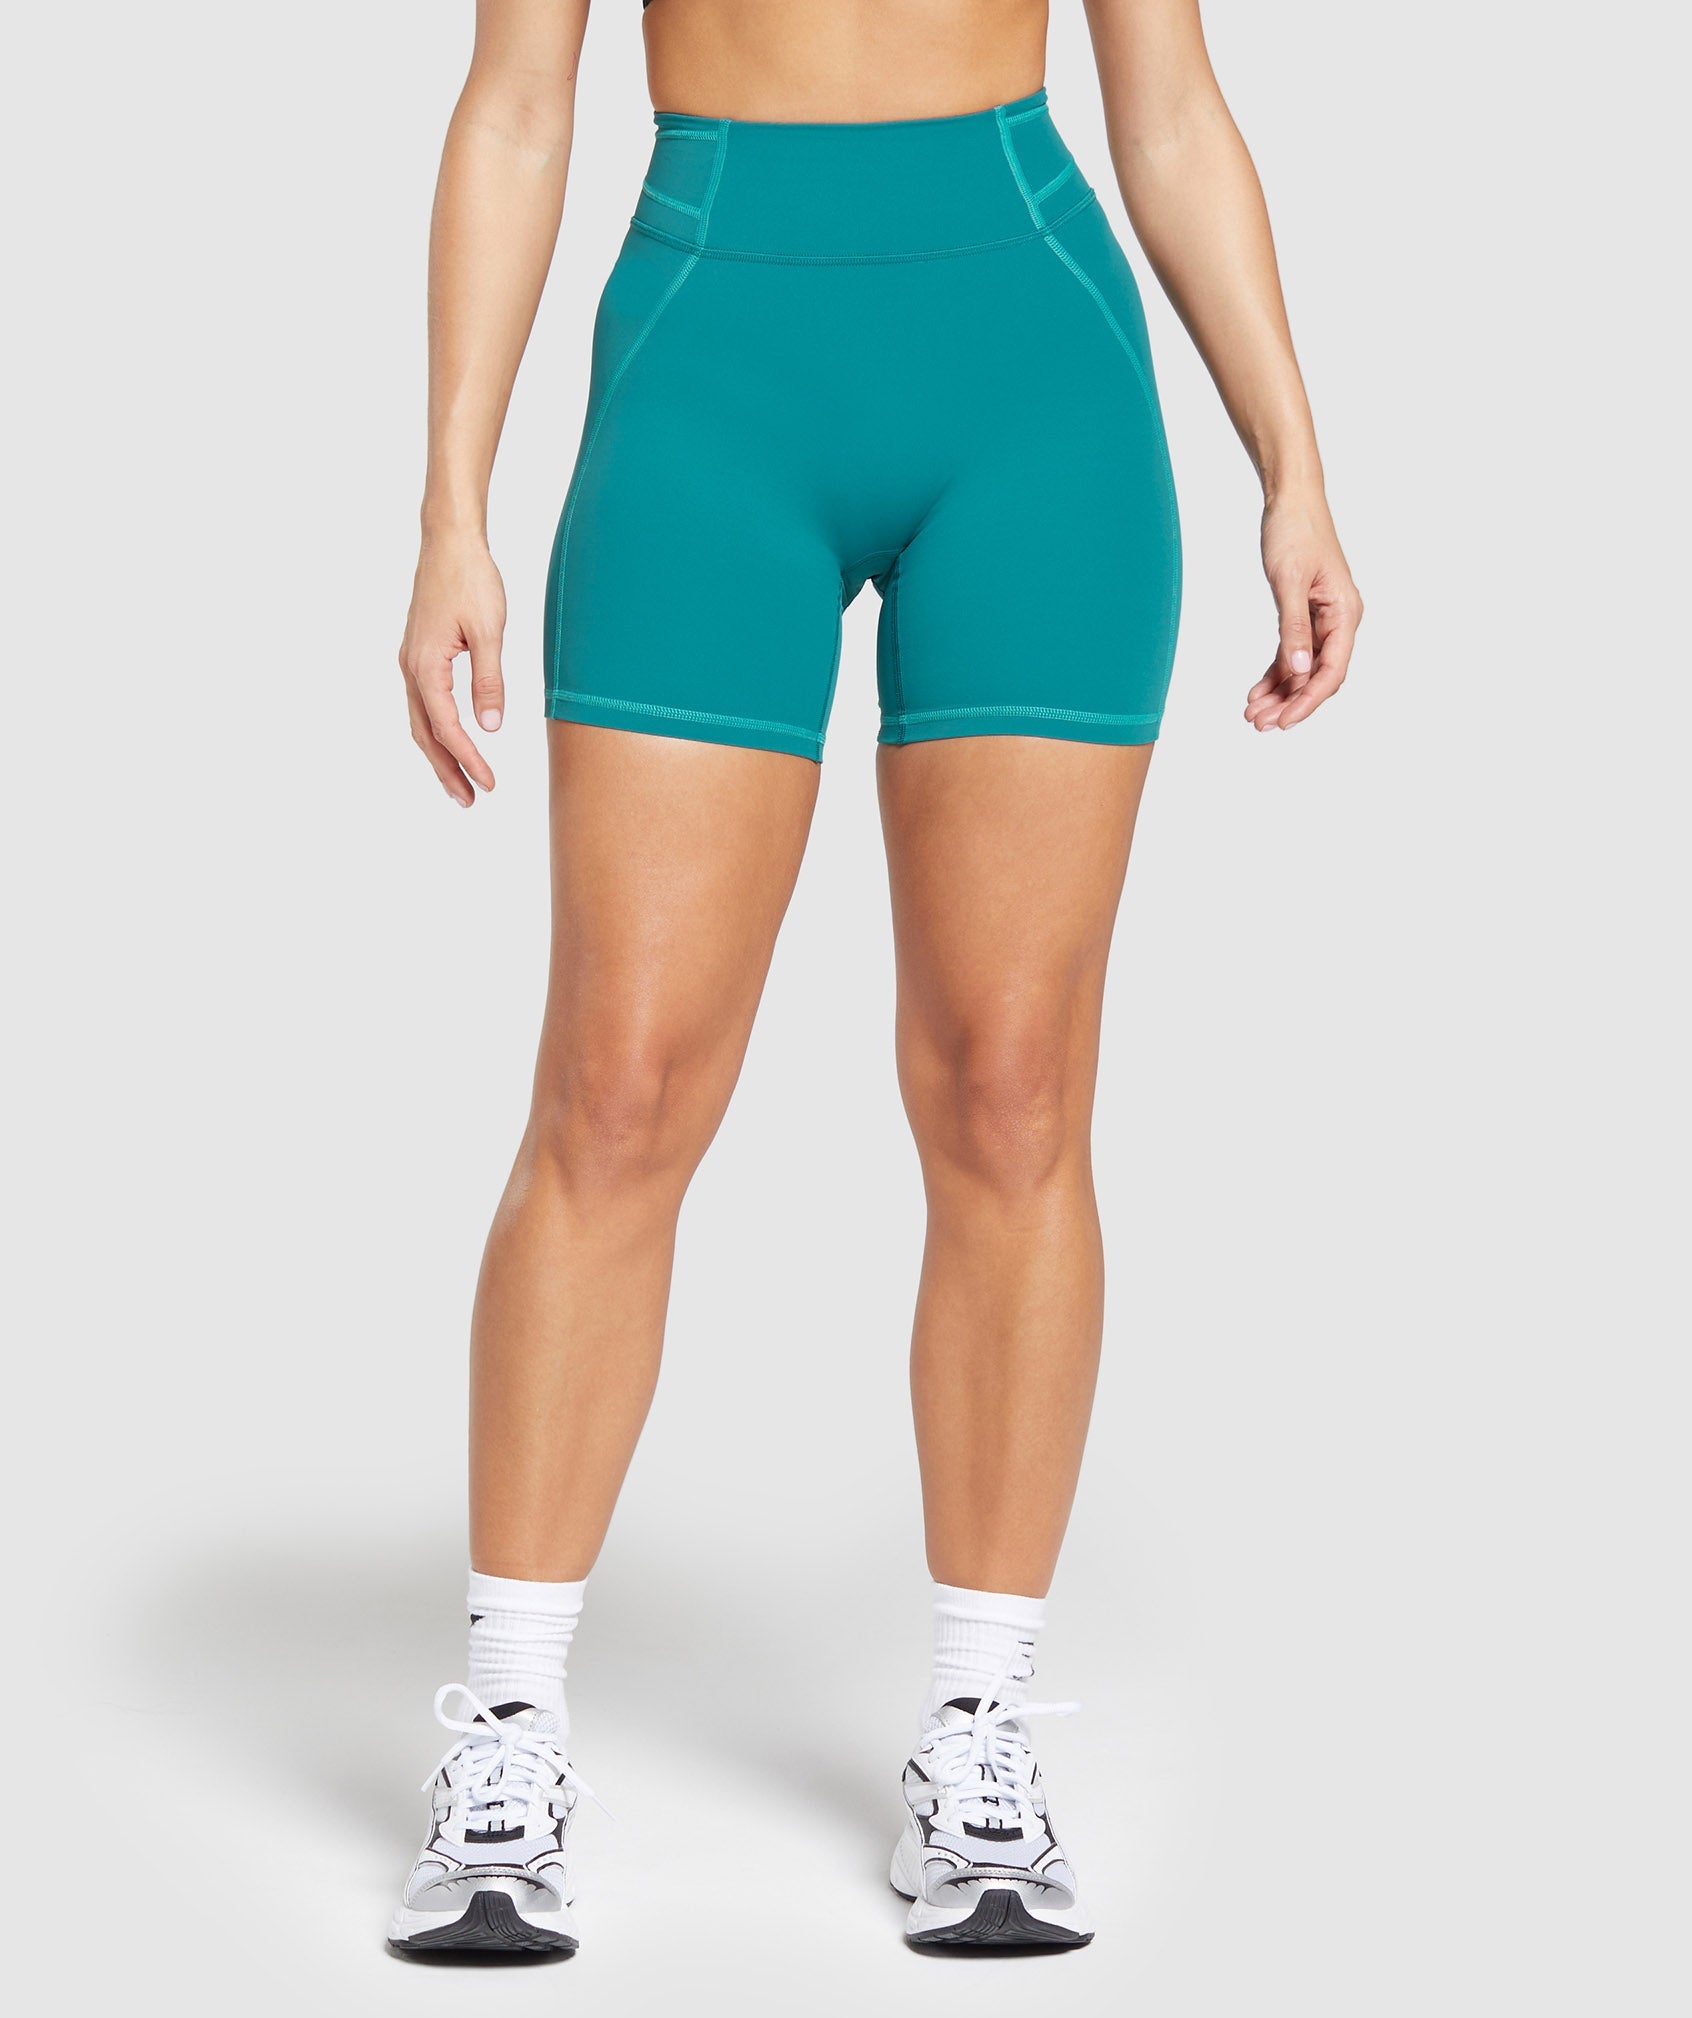 Stitch Feature Shorts in Ocean Teal - view 1